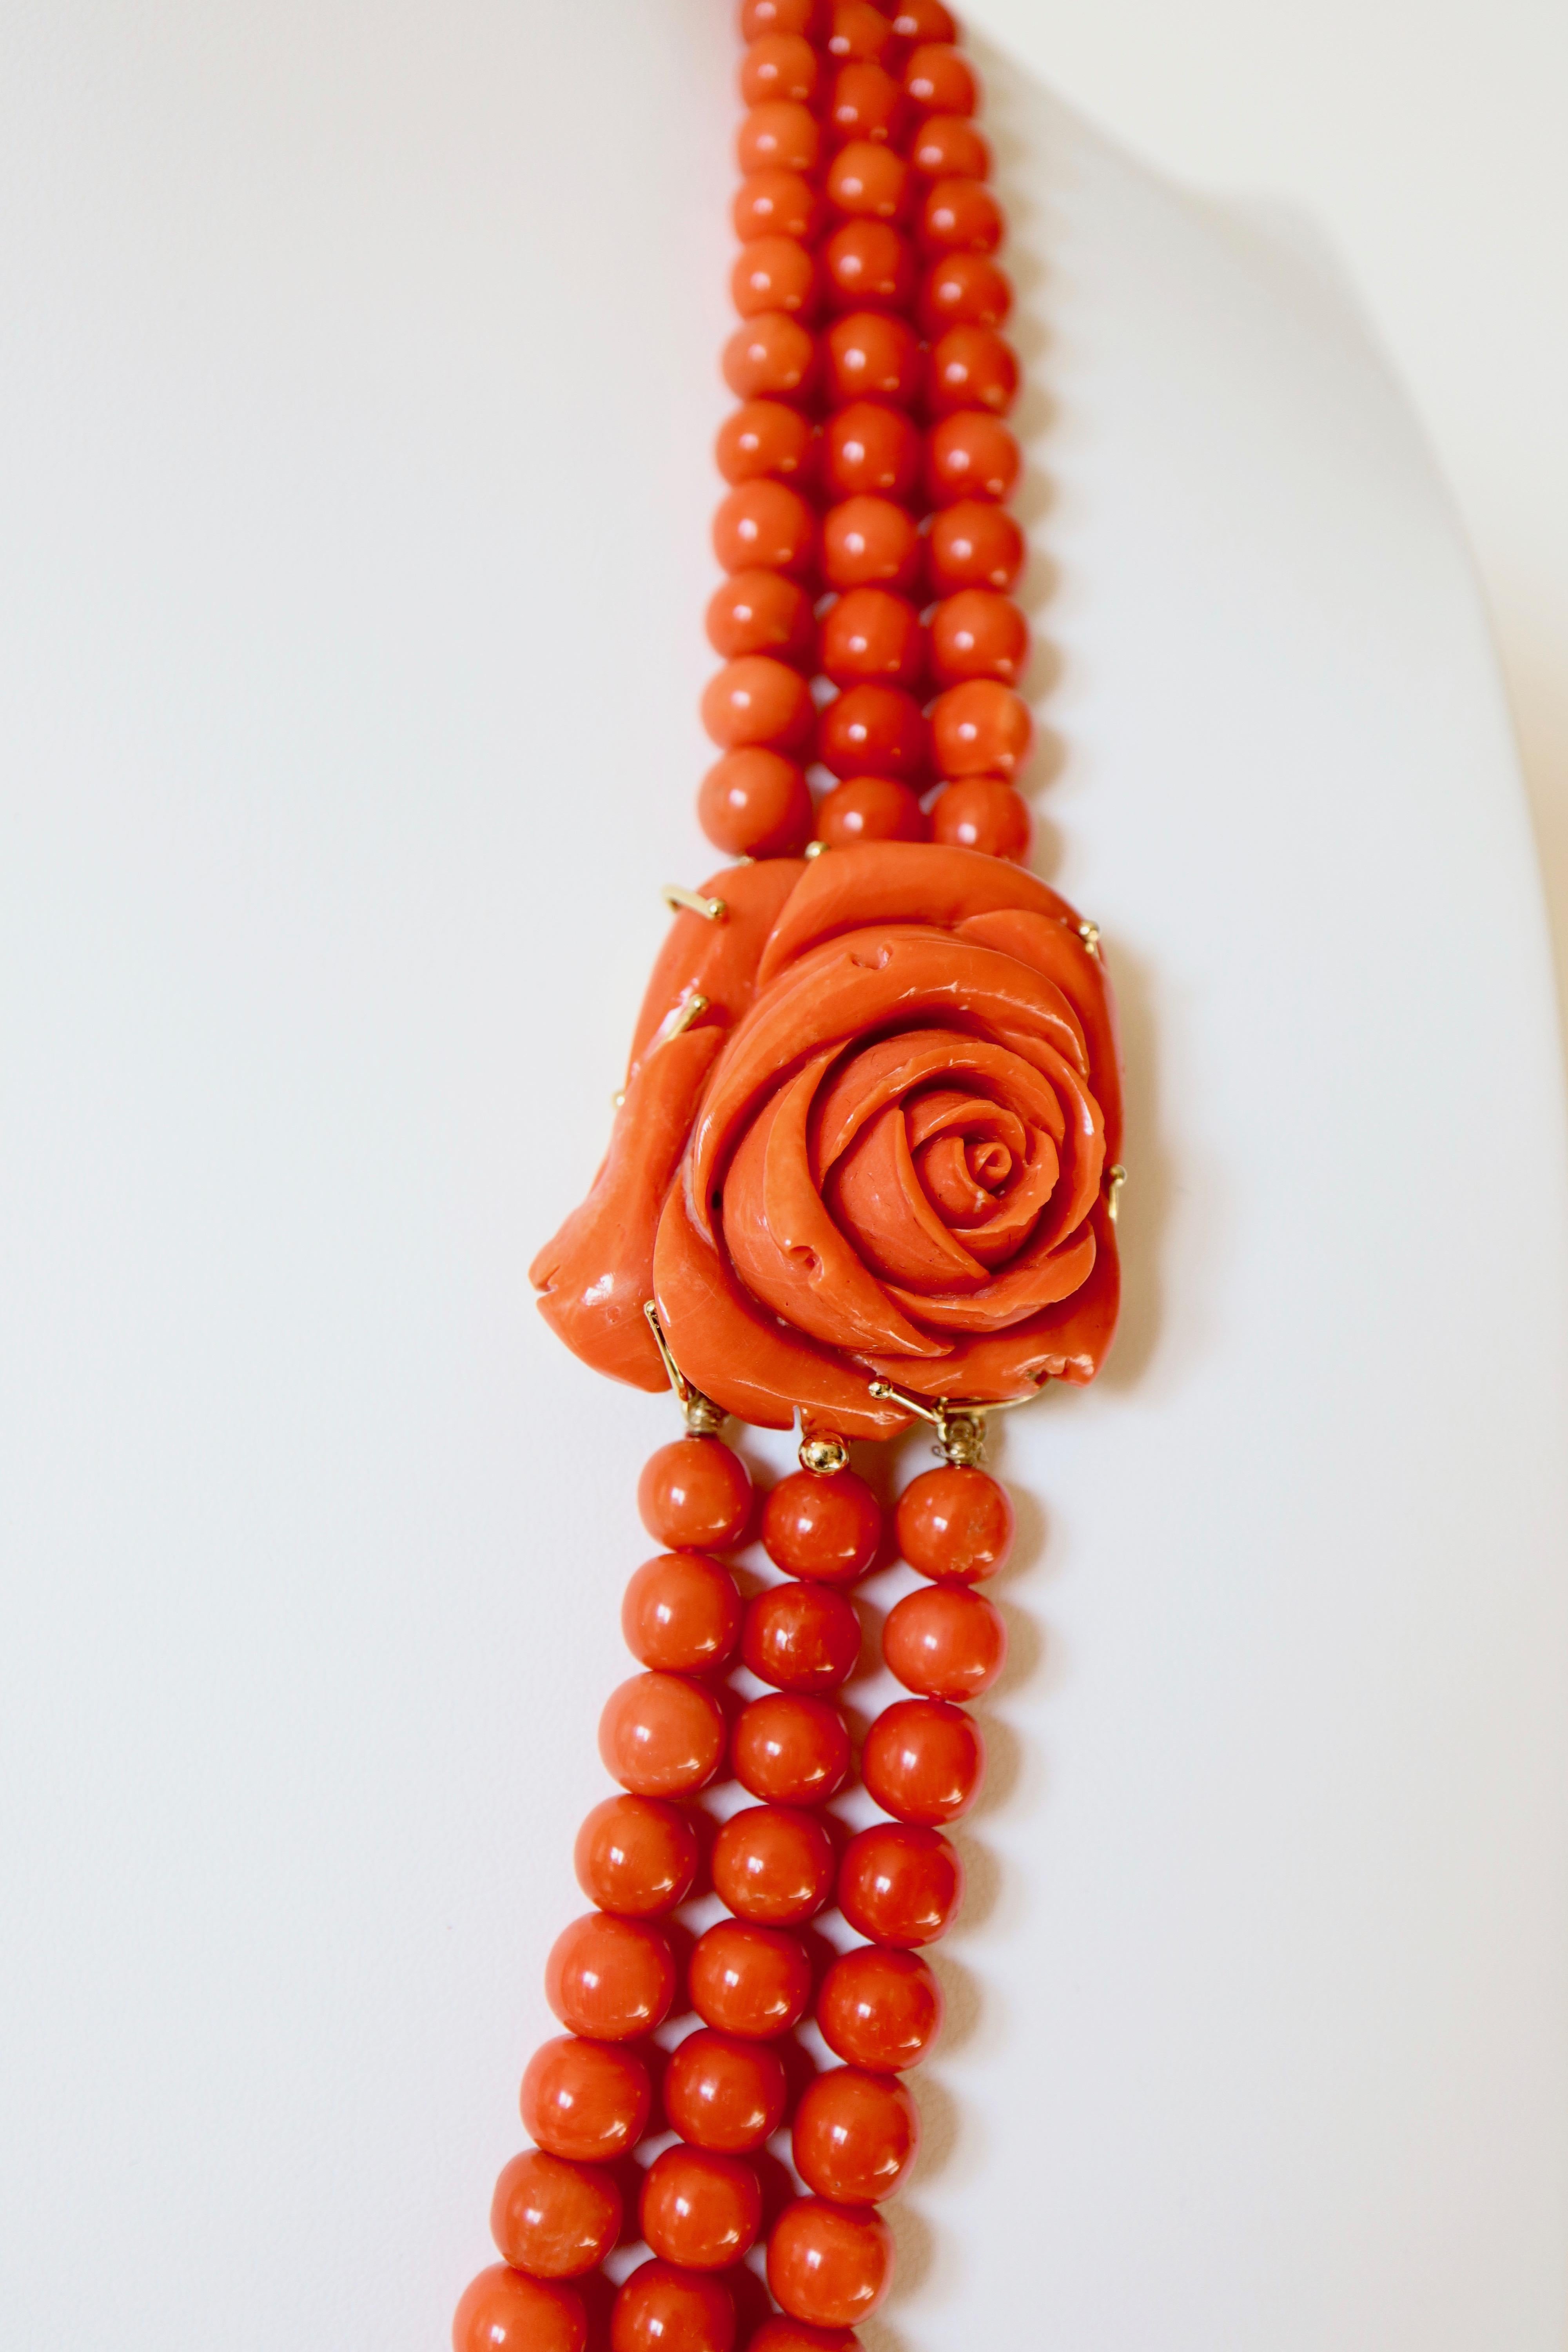 Long Necklace 3 rows of Mediterranean Coral Beads
Flower clasp stylizing a rose coral. Mechanism frame in 18K yellow gold with 2 Eight security.
3 Rows of Pearls falling from 4.5 mm to 12.5 mm at the bottom.
Clasp dimensions: 3.5 x 3.5 cm
Hallmark